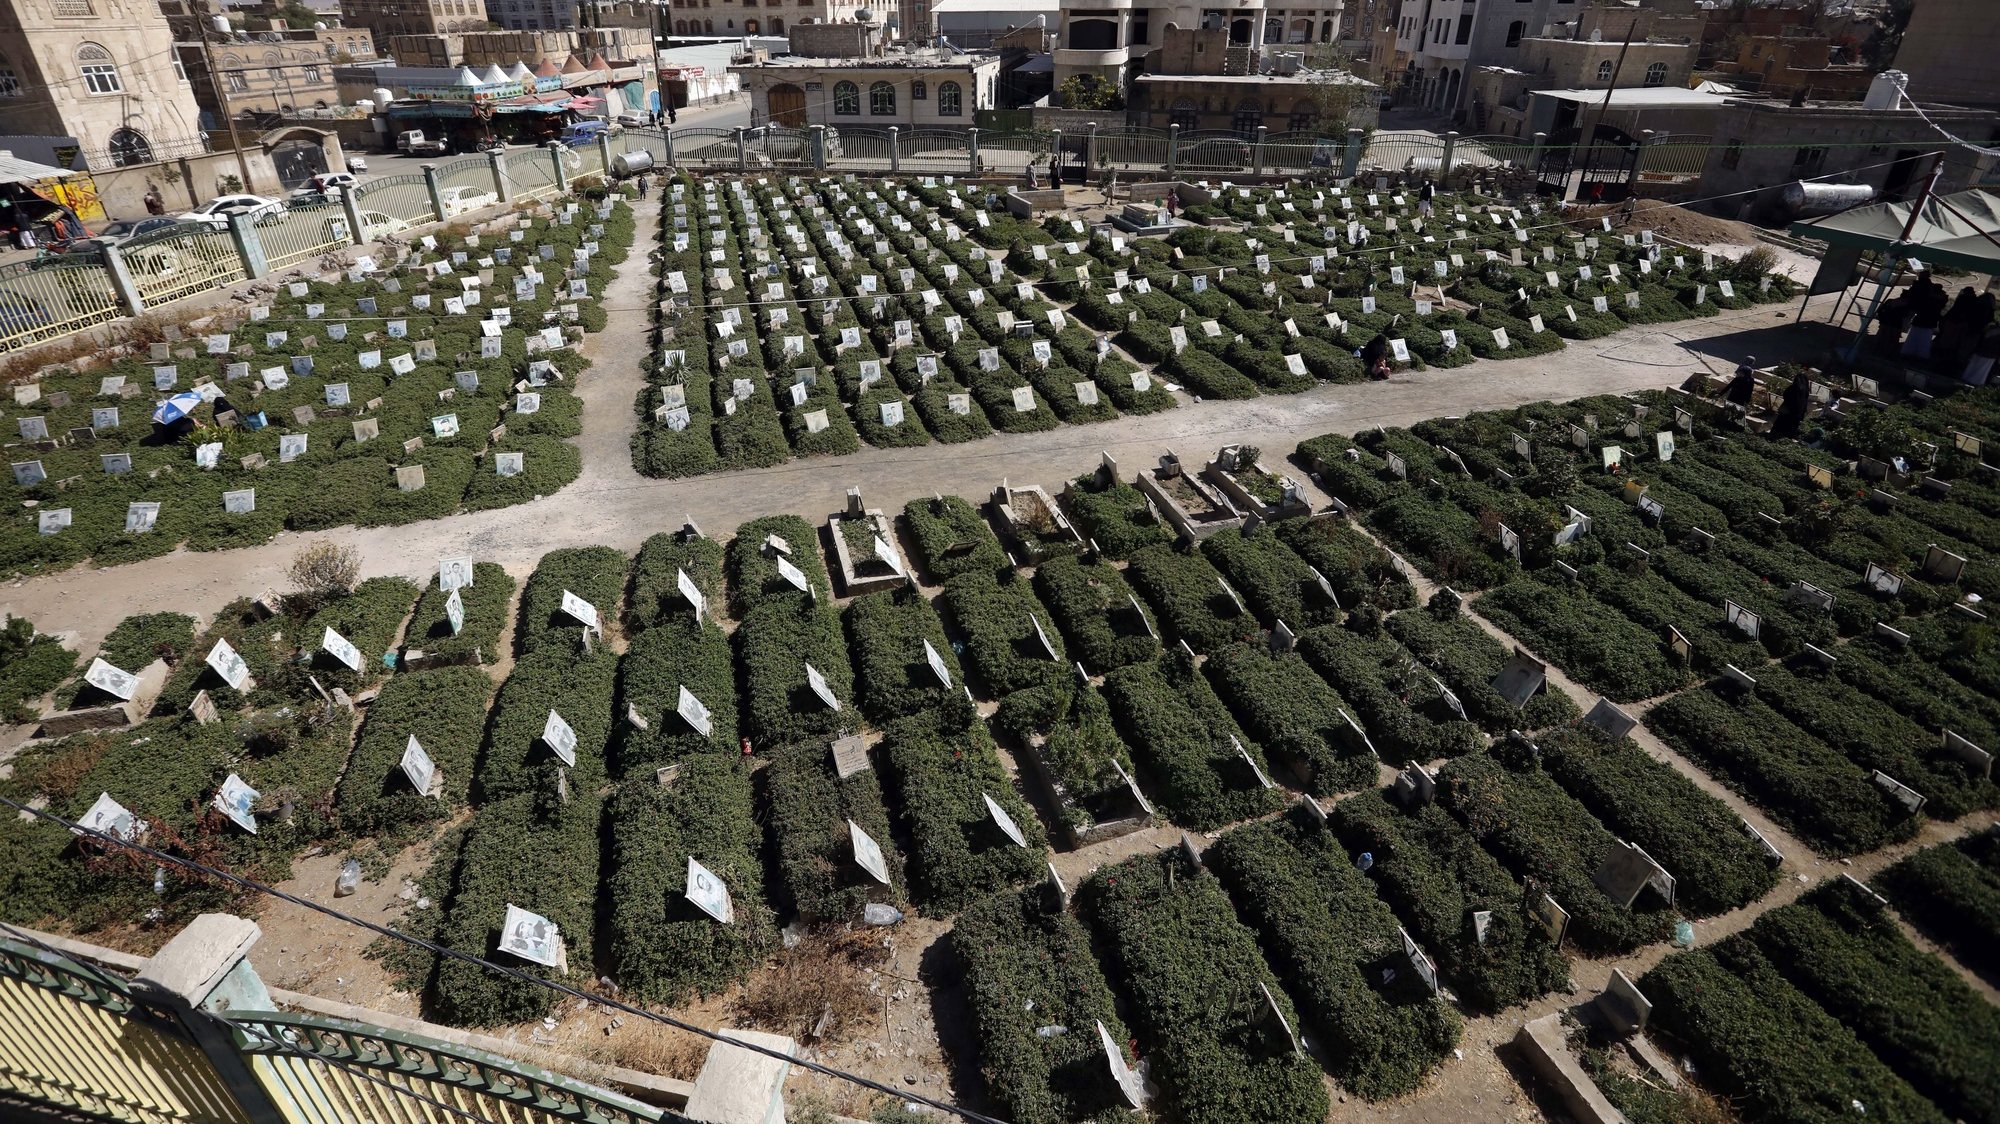 epa08862452 A view of portraits on the graves of people who were killed in Yemen&#039;s six-year-old war, at a cemetery in Sana&#039;a, Yemen, 04 December 2020. According to UN recent estimates, over 233,000 people in war-torn Yemen have been killed over the last six years since a power struggle escalated in 2014 between the Houthis and the Saudi-backed Yemeni government, which sparked a full-blown fighting when the Saudi-led military coalition launched military operations and an airstrike campaign against the Houthis, seeking to restore Yemenâ€™s internationally-recognized government to power and push back the Houthis.  EPA/YAHYA ARHAB